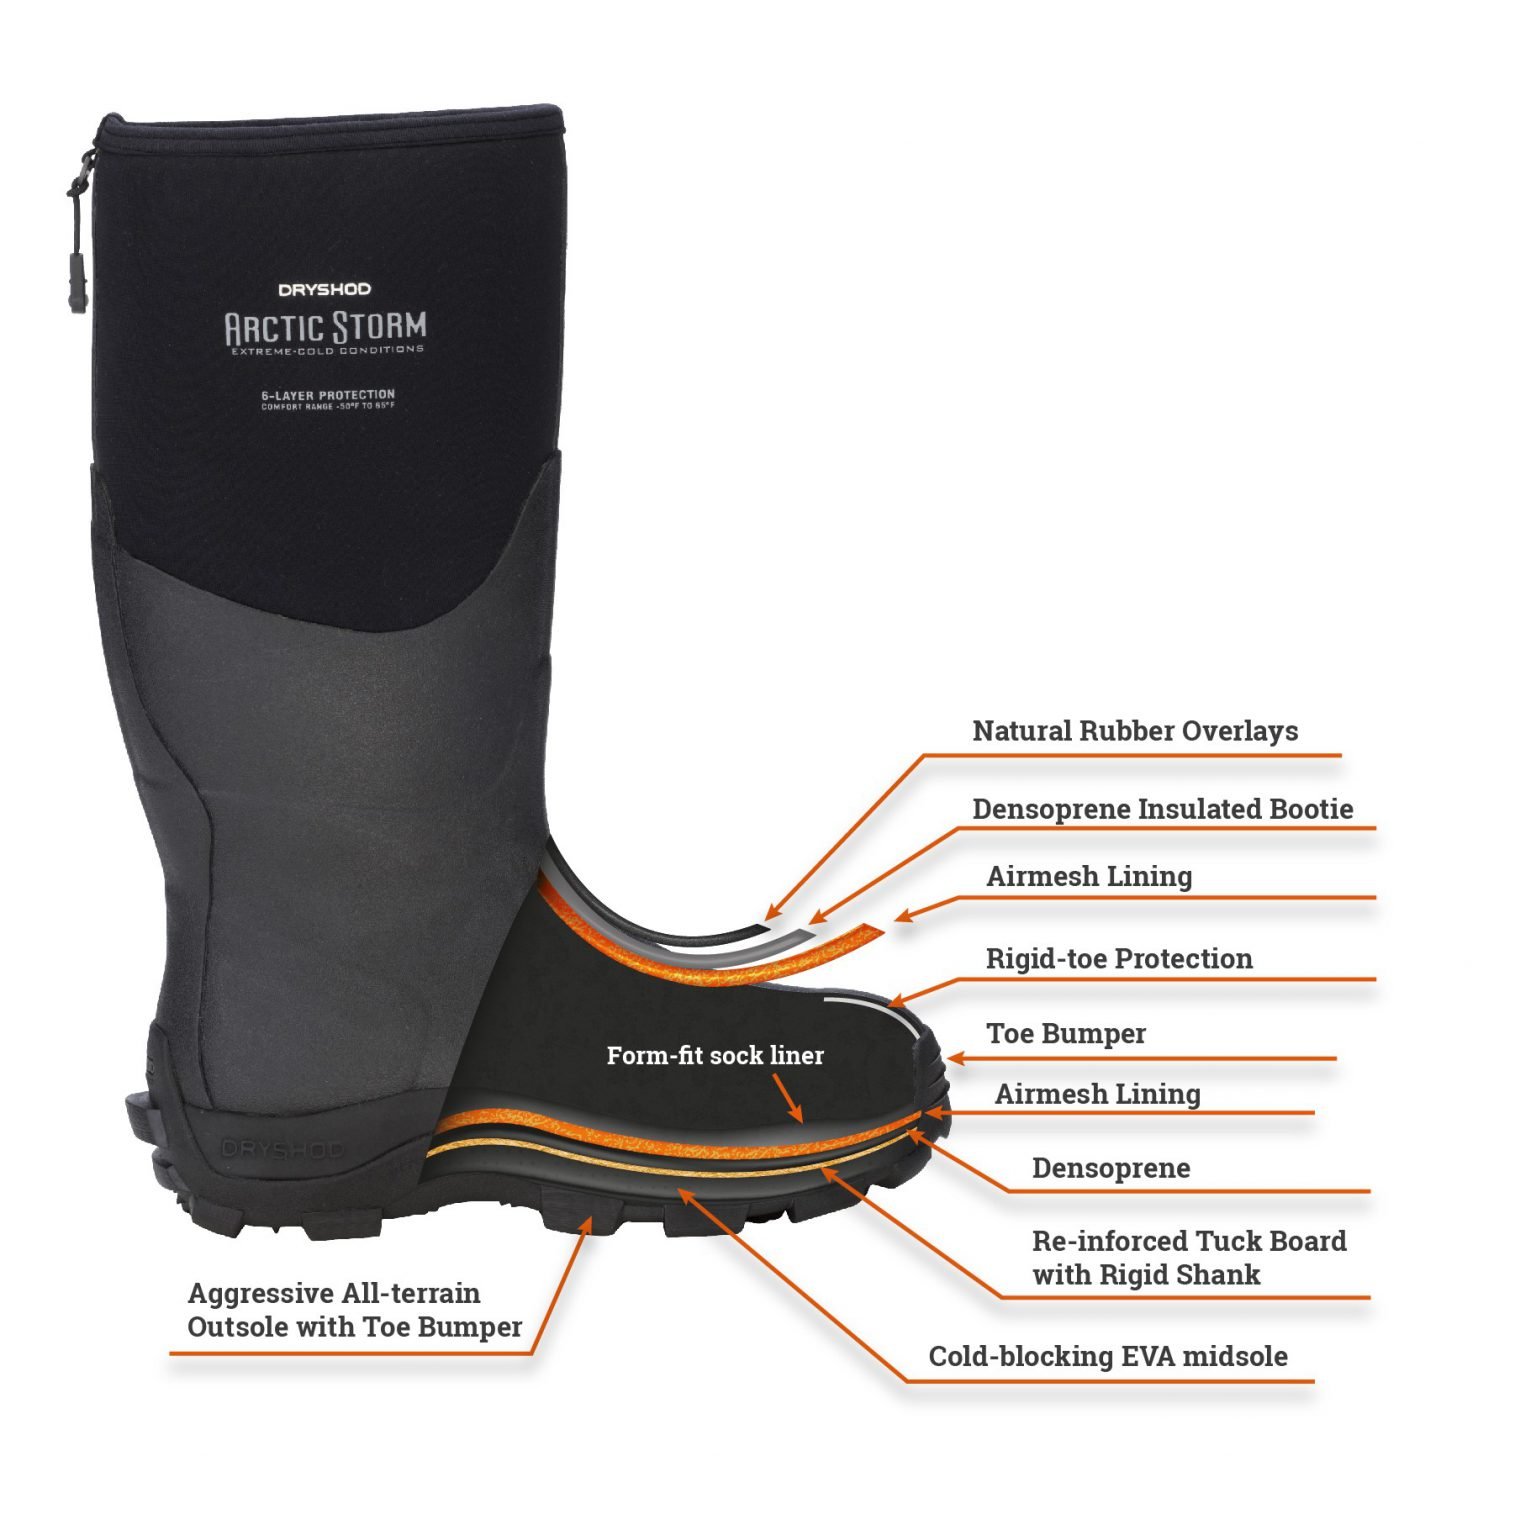 Dryshod Footwear Features and Anatomy – Dryshod Waterproof Boots